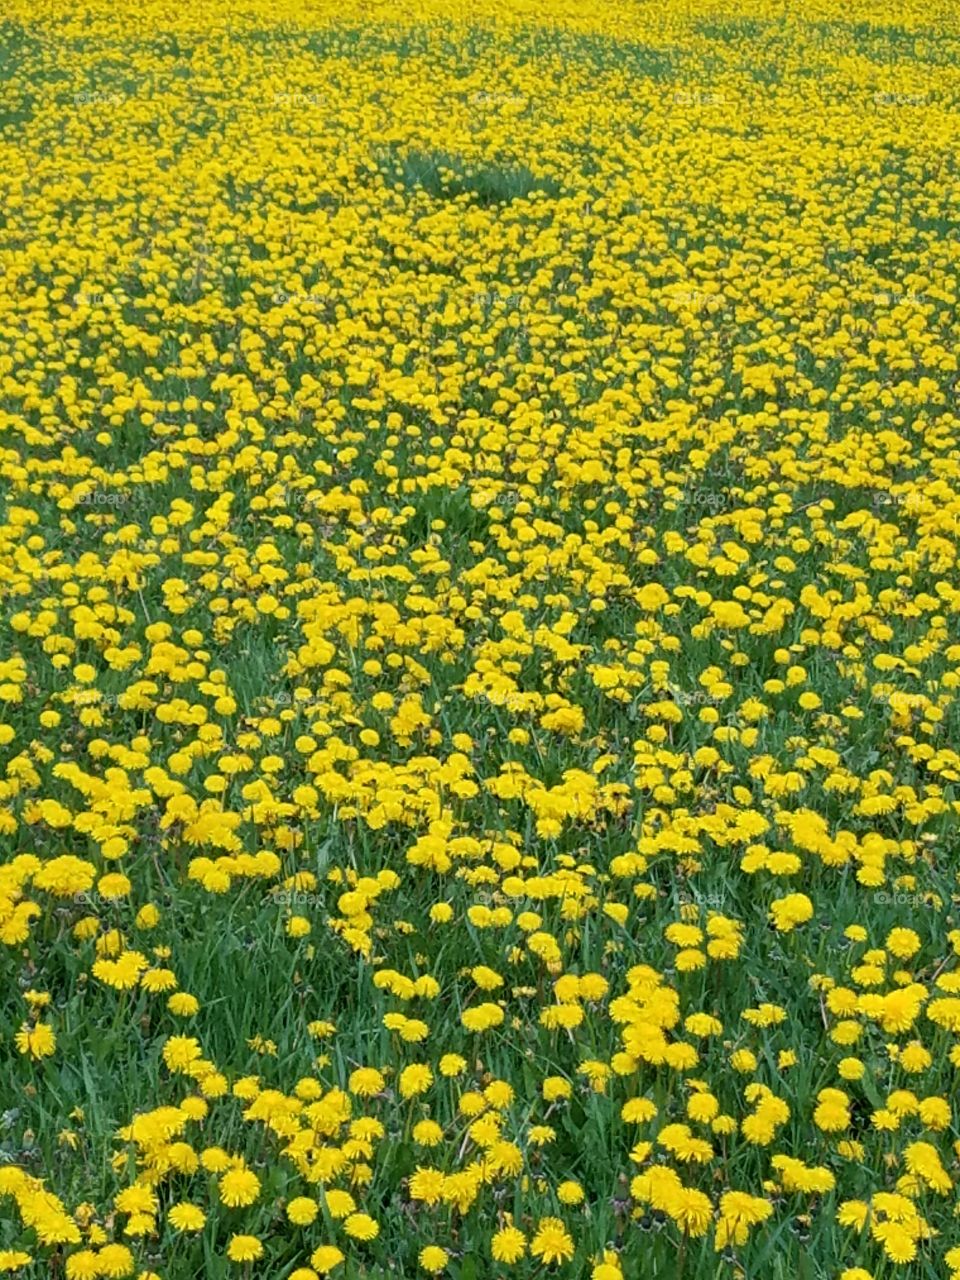 Overhead view of a yellow flowers